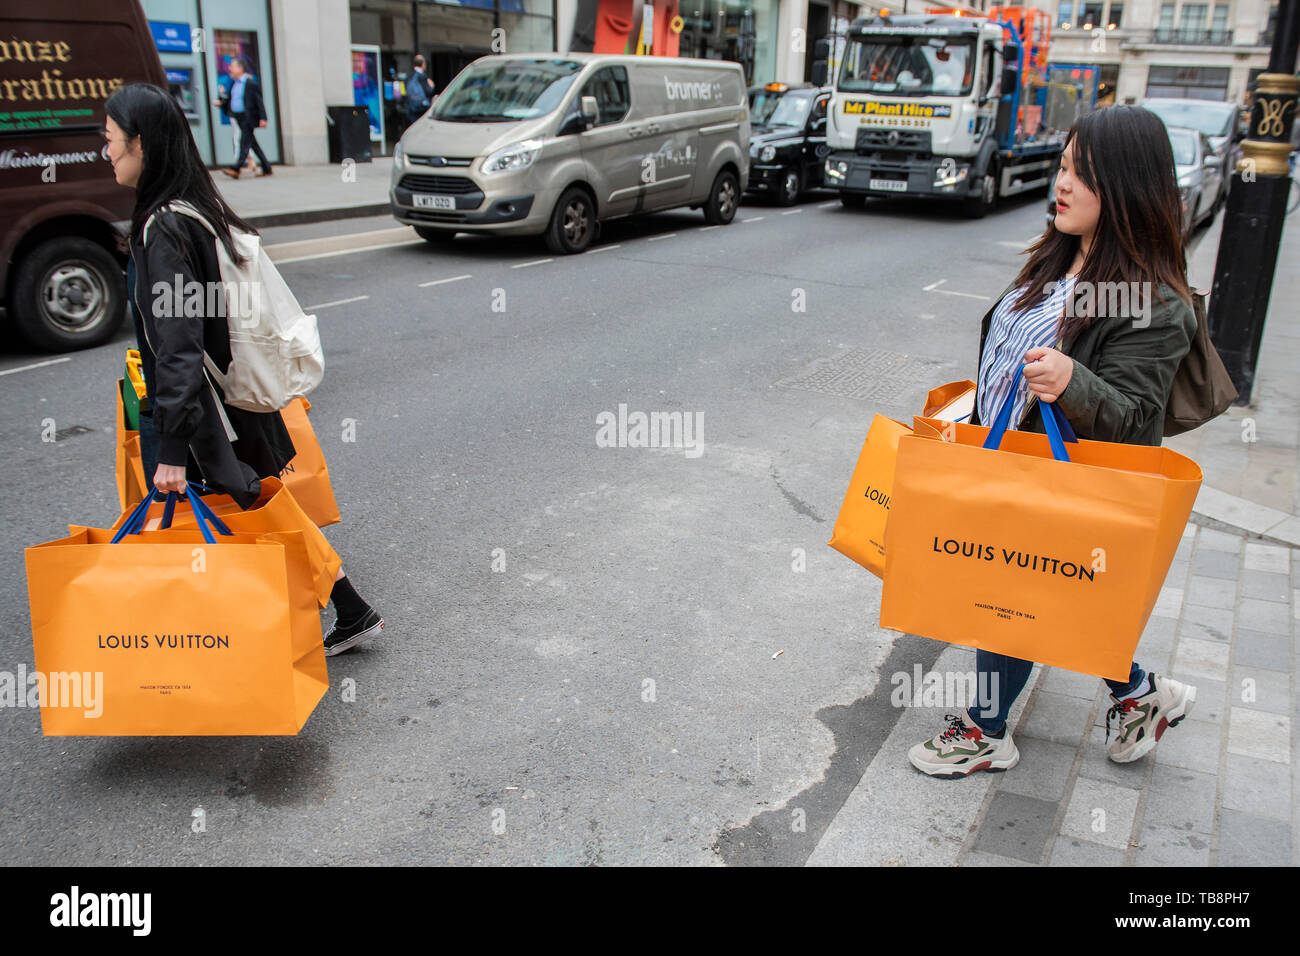 London, UK. 31st May 2019. Asian shoppers with a large number of Louis  Vuitton bags wait for an UBER near regents street. Credit: Guy Bell/Alamy  Live News Stock Photo - Alamy